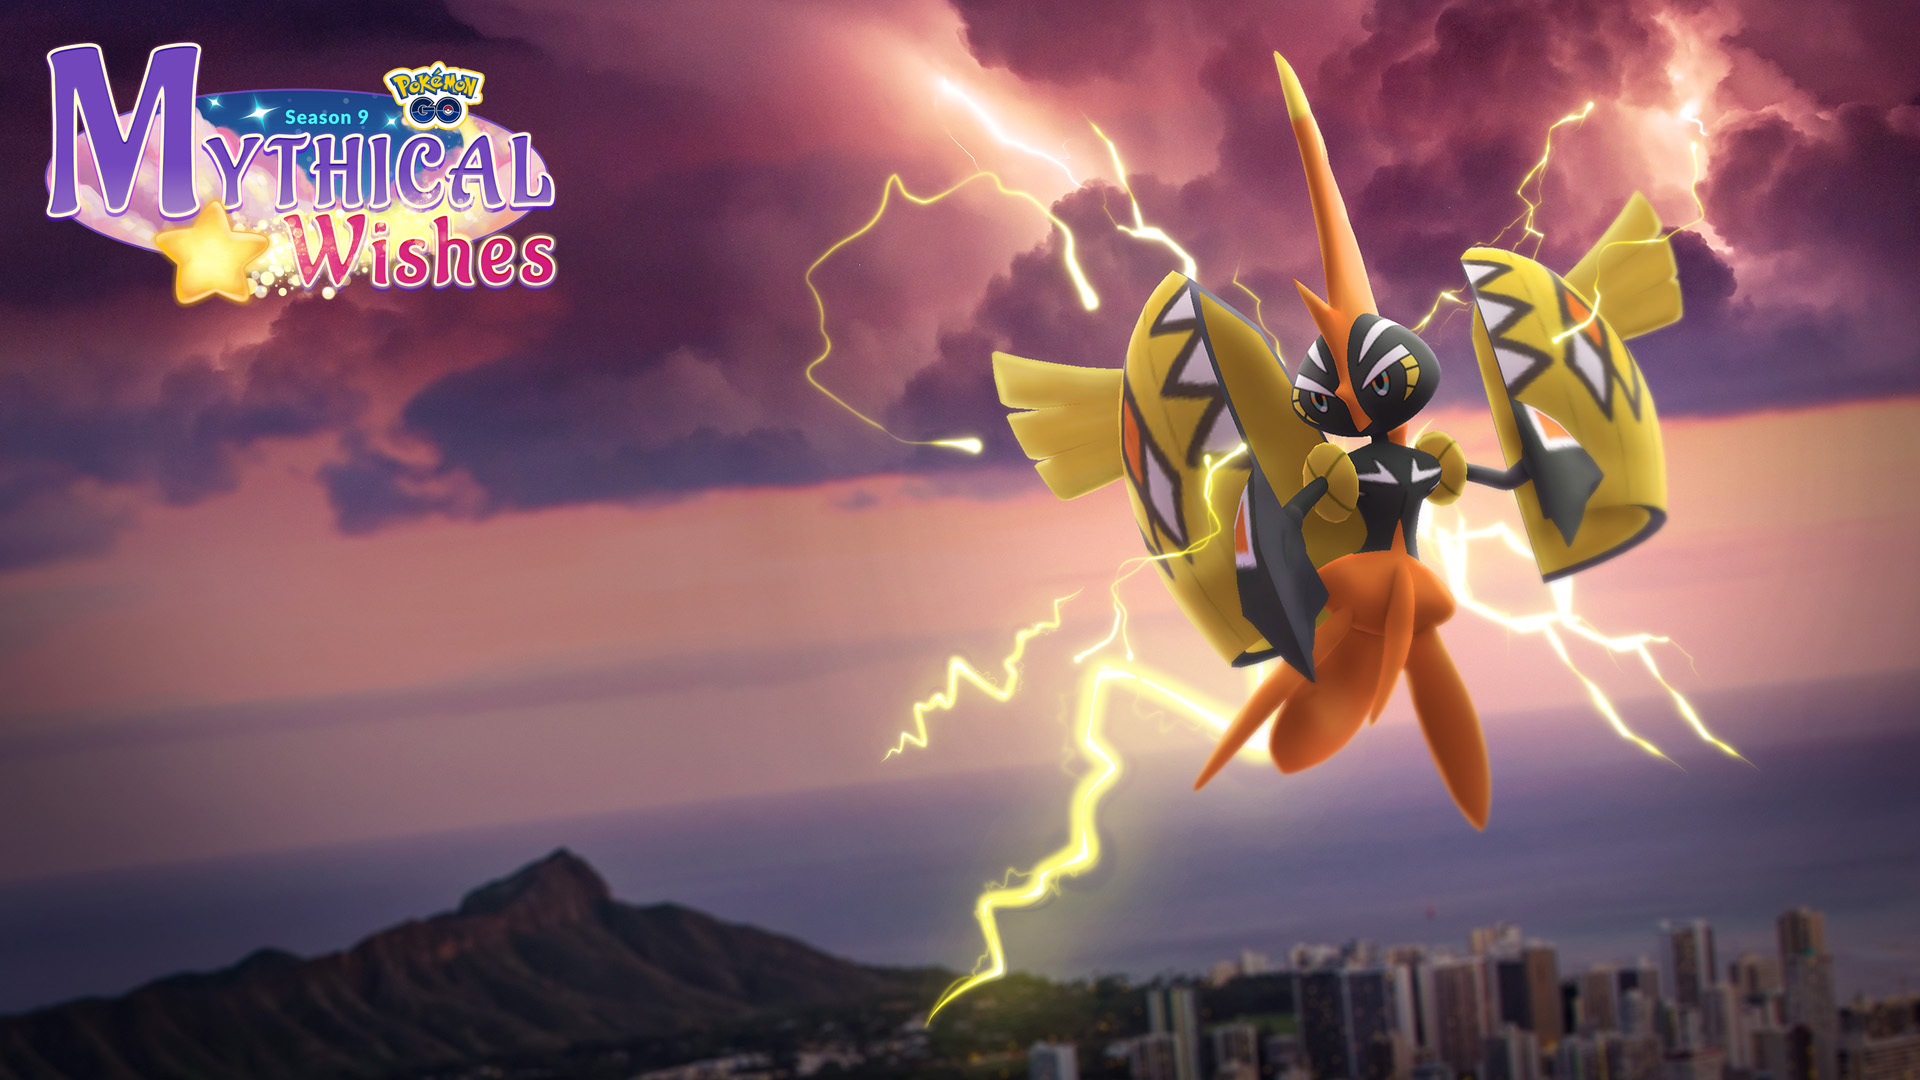 Pokémon GO on X: We can't be the only ones feeling the spark in the air  ⚡ The Crackling Voltage event has begun!  / X